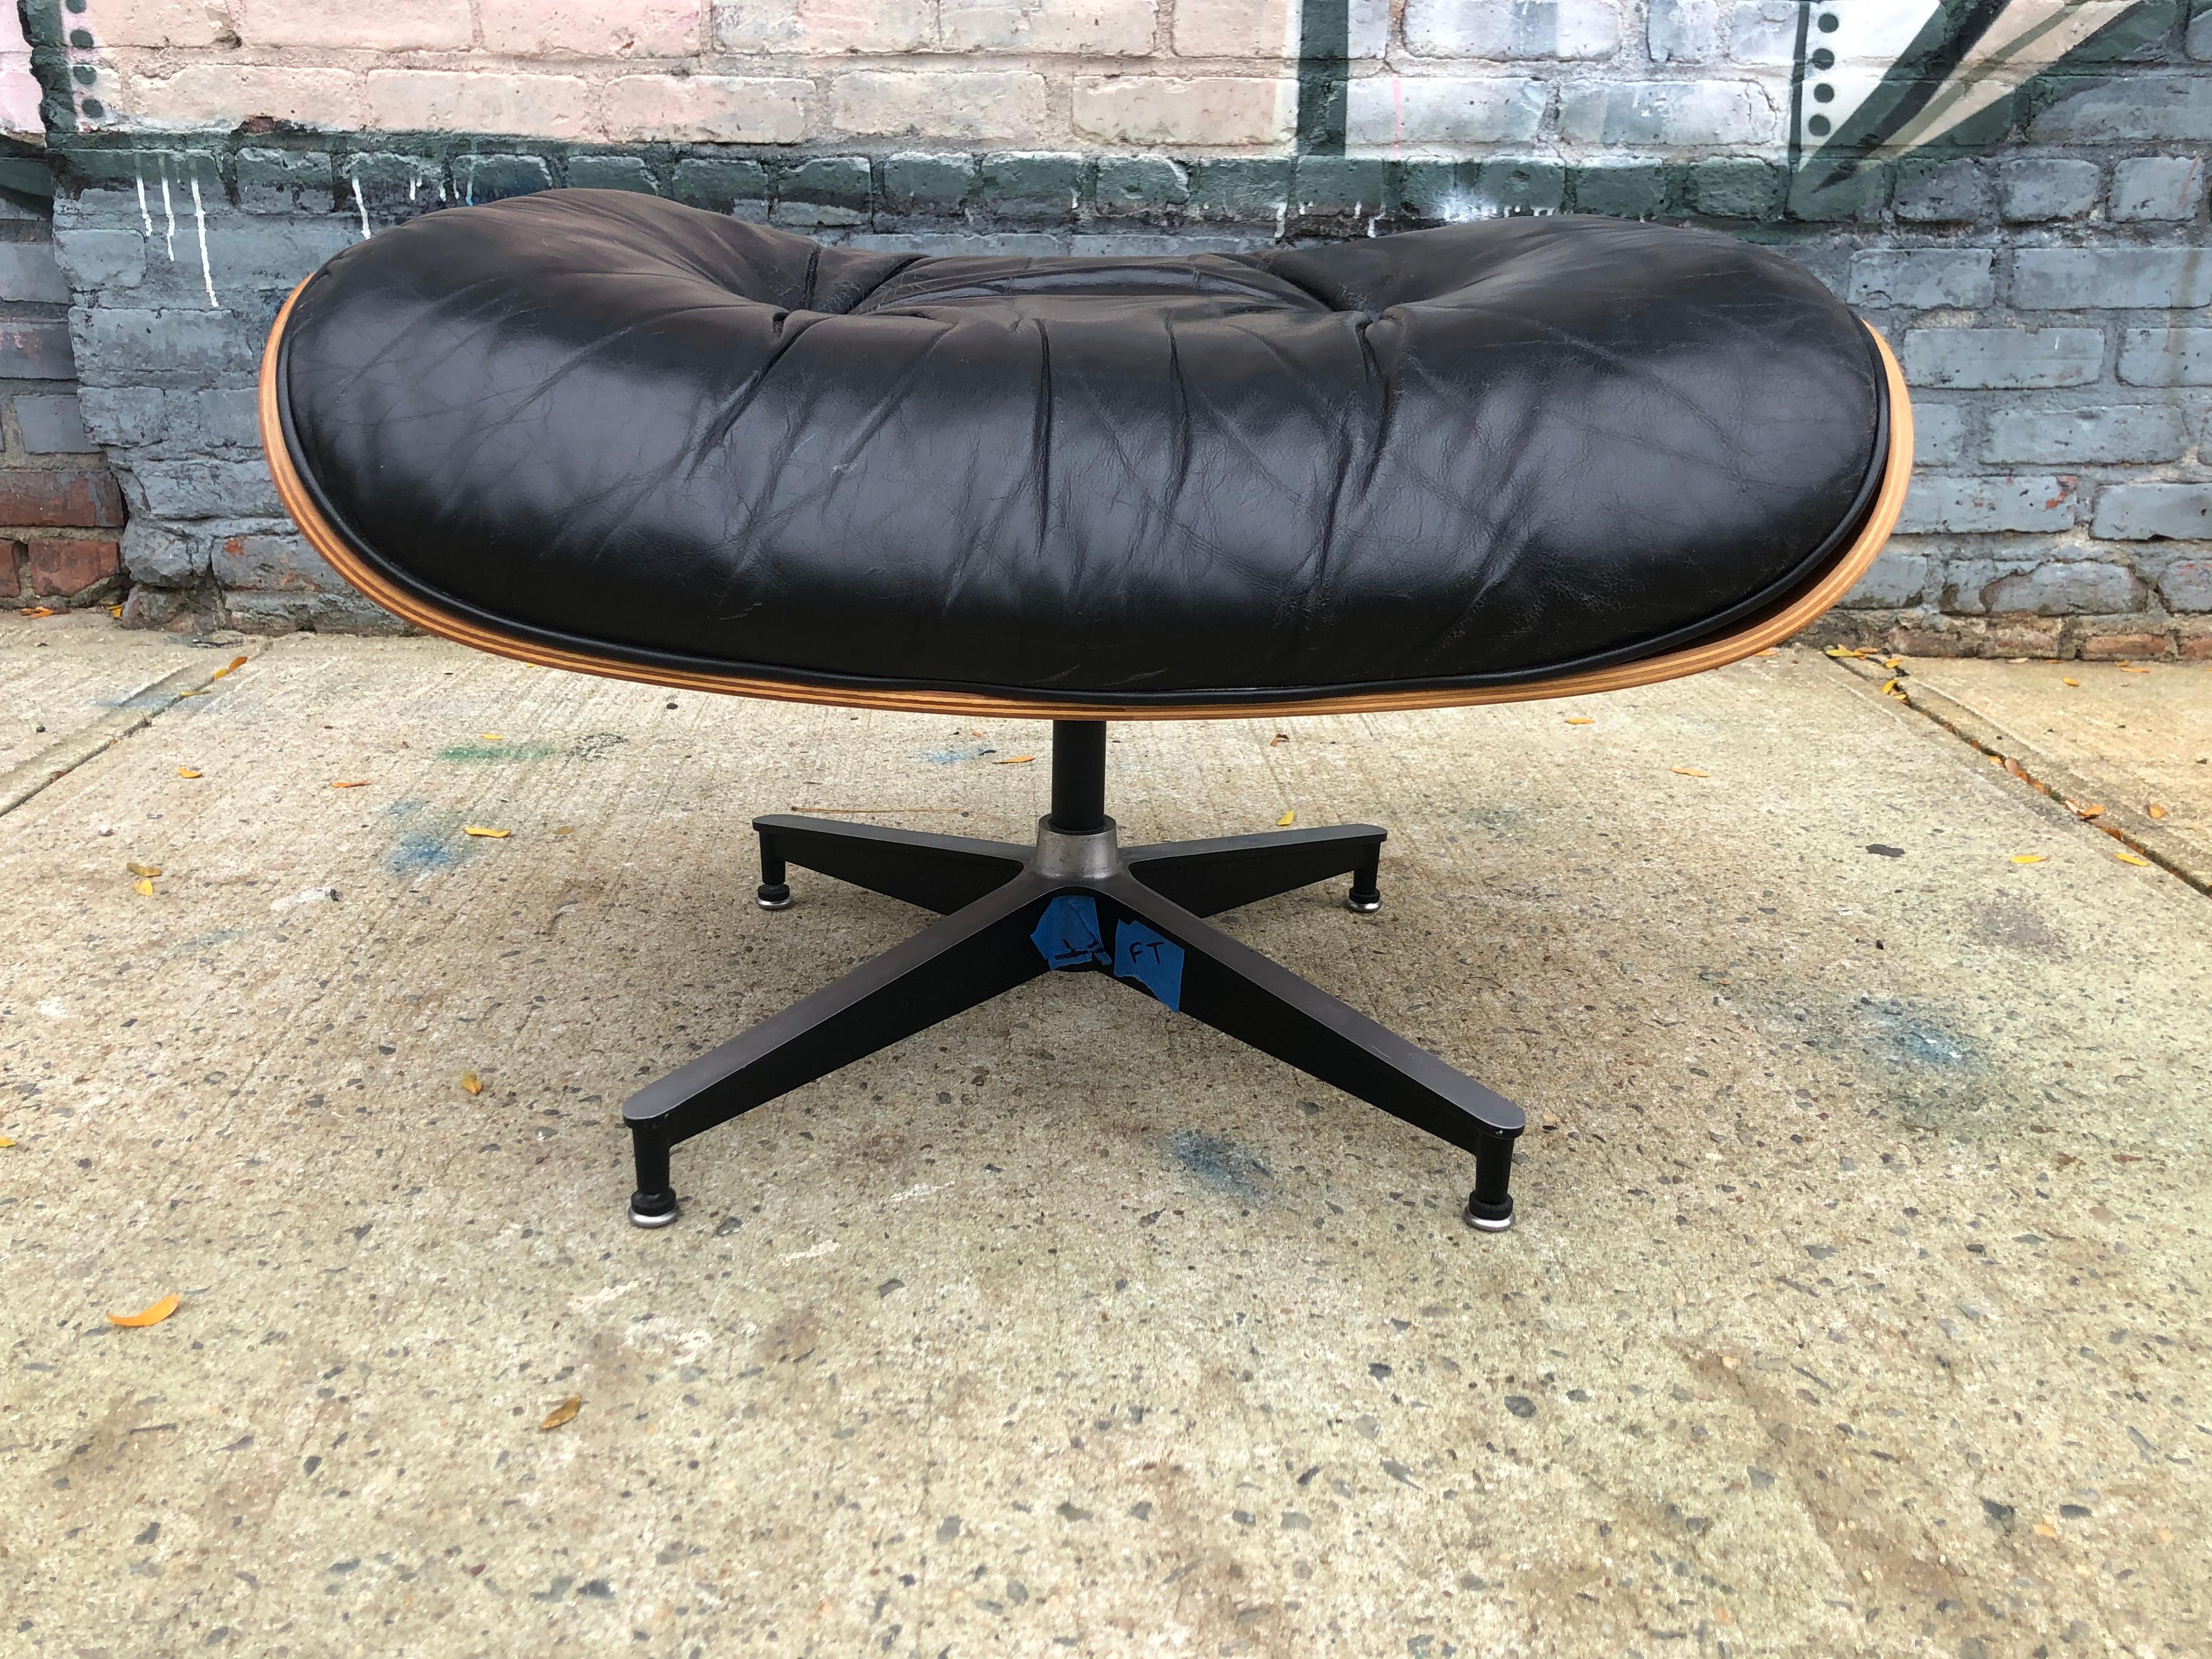 Herman Miller Eames ottoman or footstool in cherry and black leather. Signed Herman Miller. No tears or rips. Normal wear. Warm vibrant cherry color and grains. Add this to your chair to complete your set.